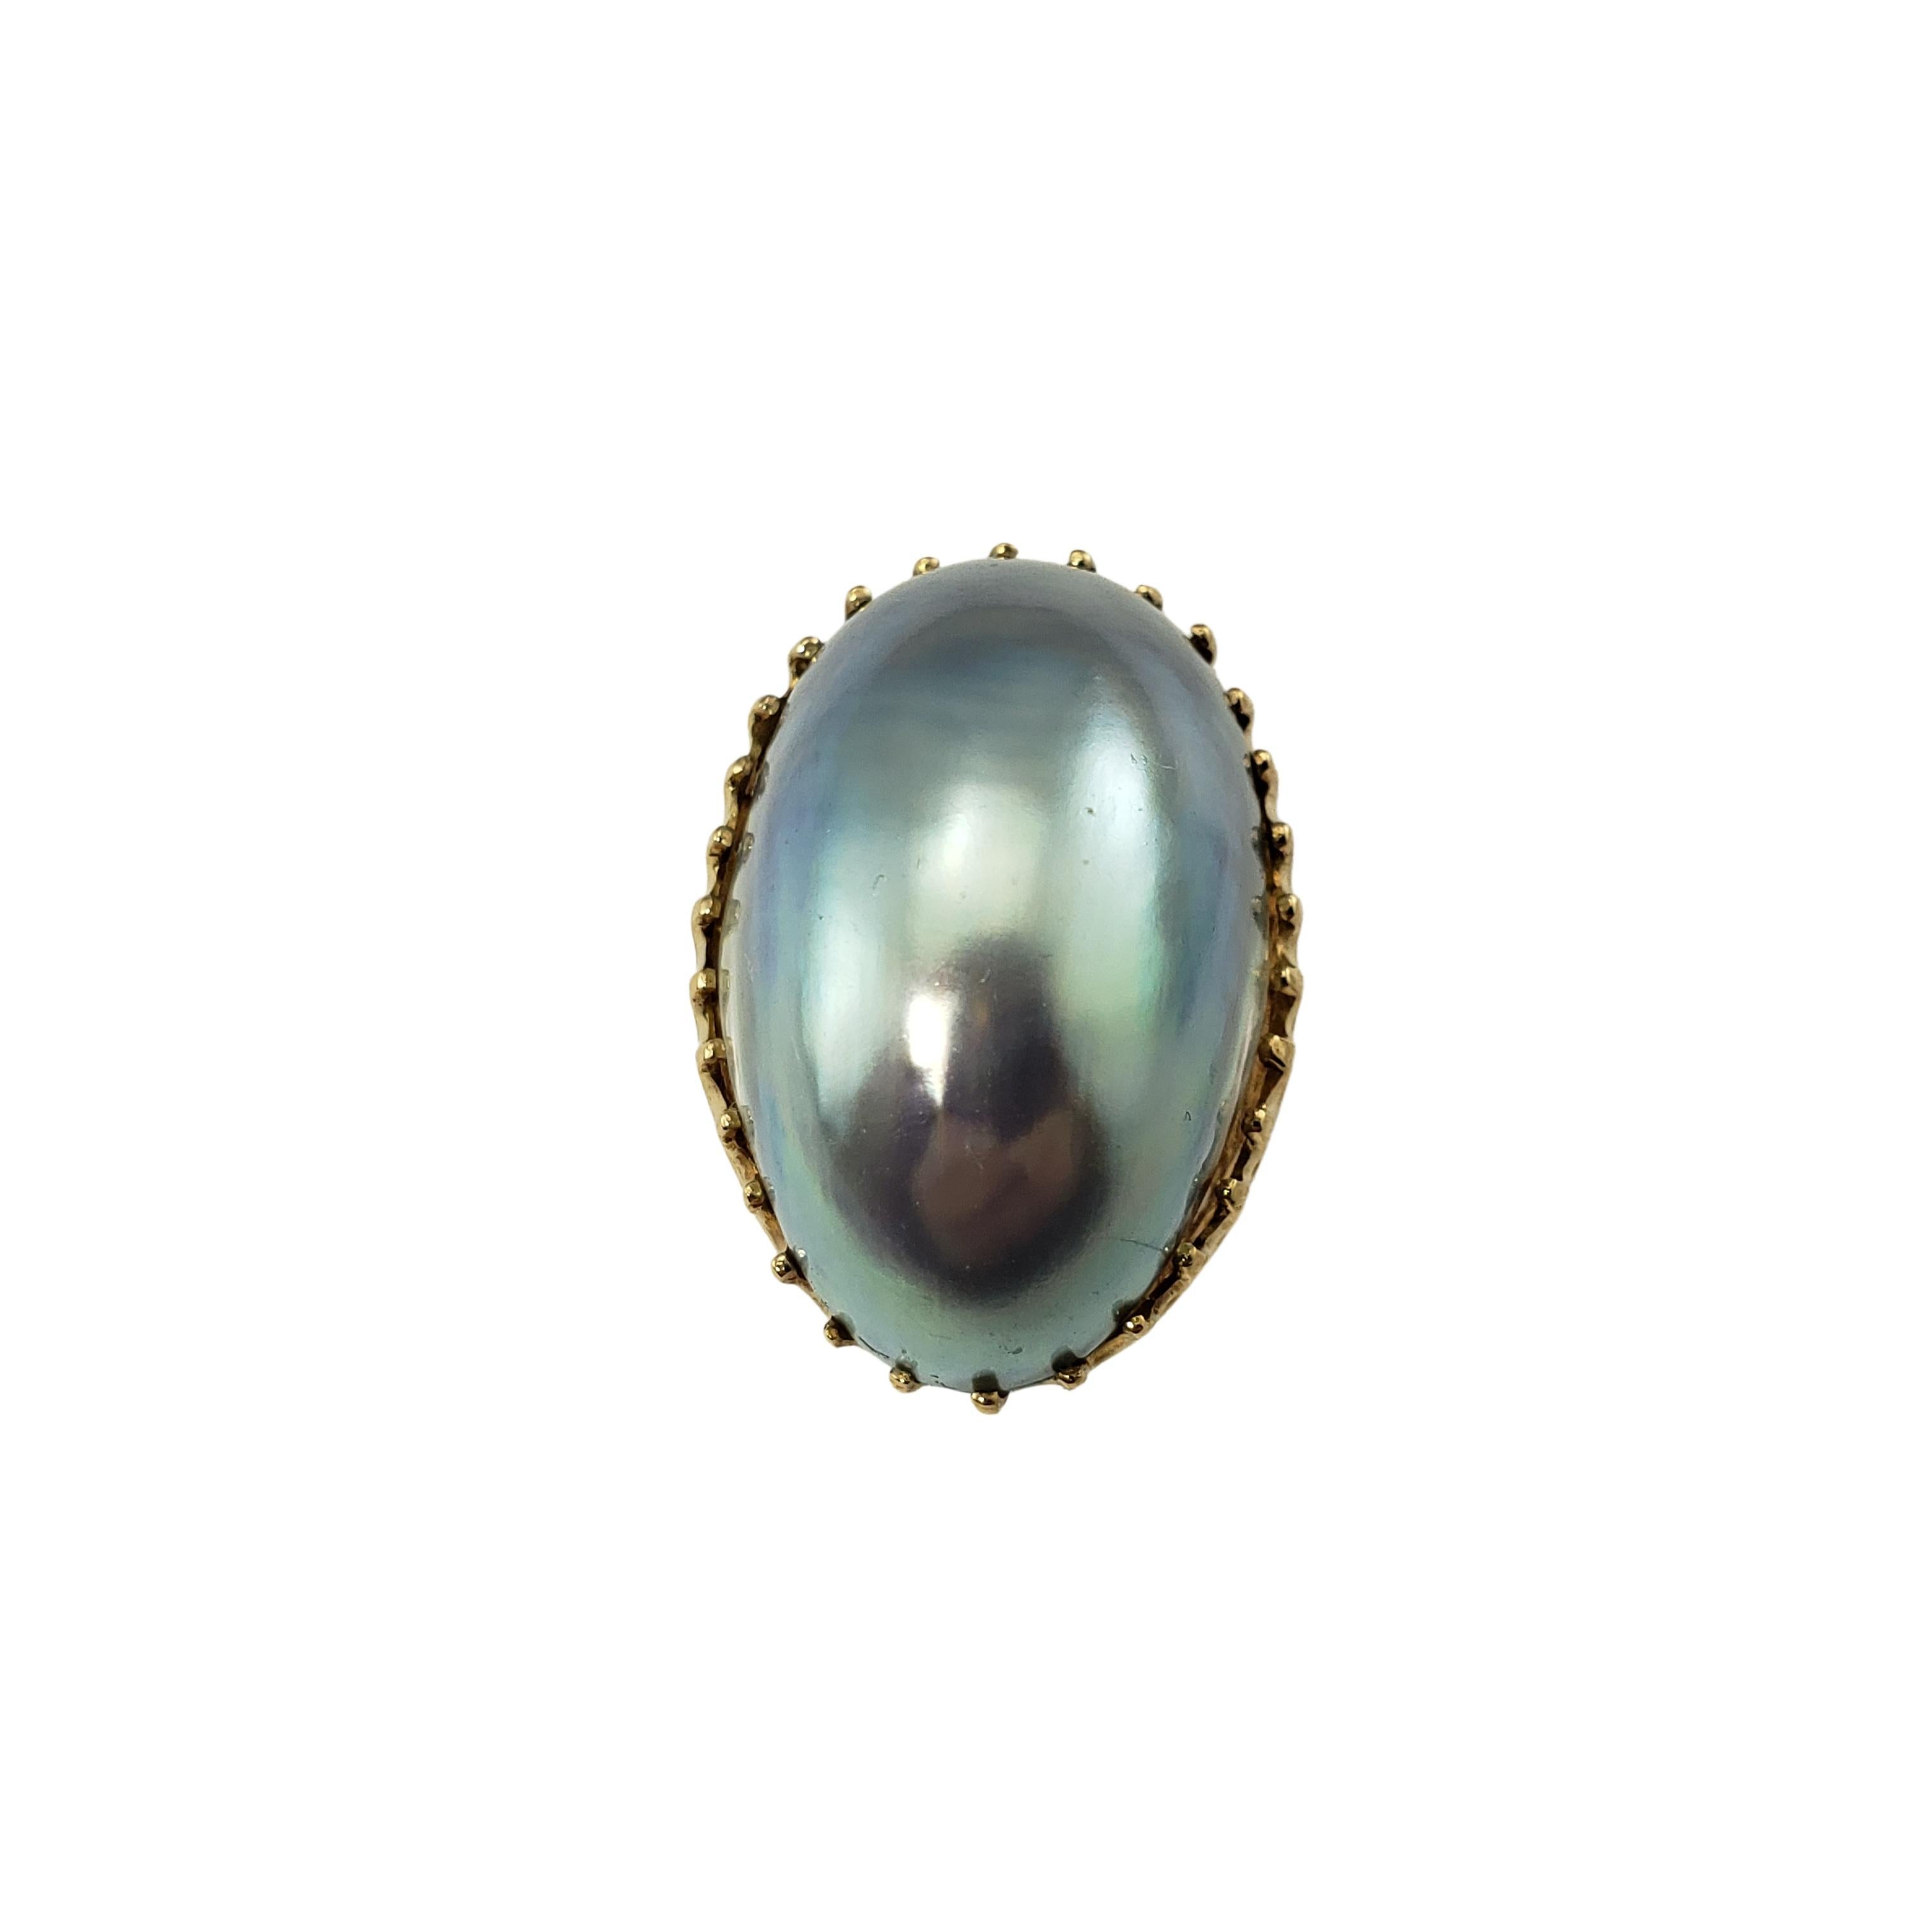 Vintage 14 Karat Yellow Gold and Mabe Grey Pearl Ring Size 5.25-

This stunning ring features one oval Mabe pearl (27 mm x 16 mm) set in beautifully detailed 14K yellow gold. Height: 17 mm.
Shank: 2 mm.

Size: 5.25

Weight: 7.5 dwt. / 7.5